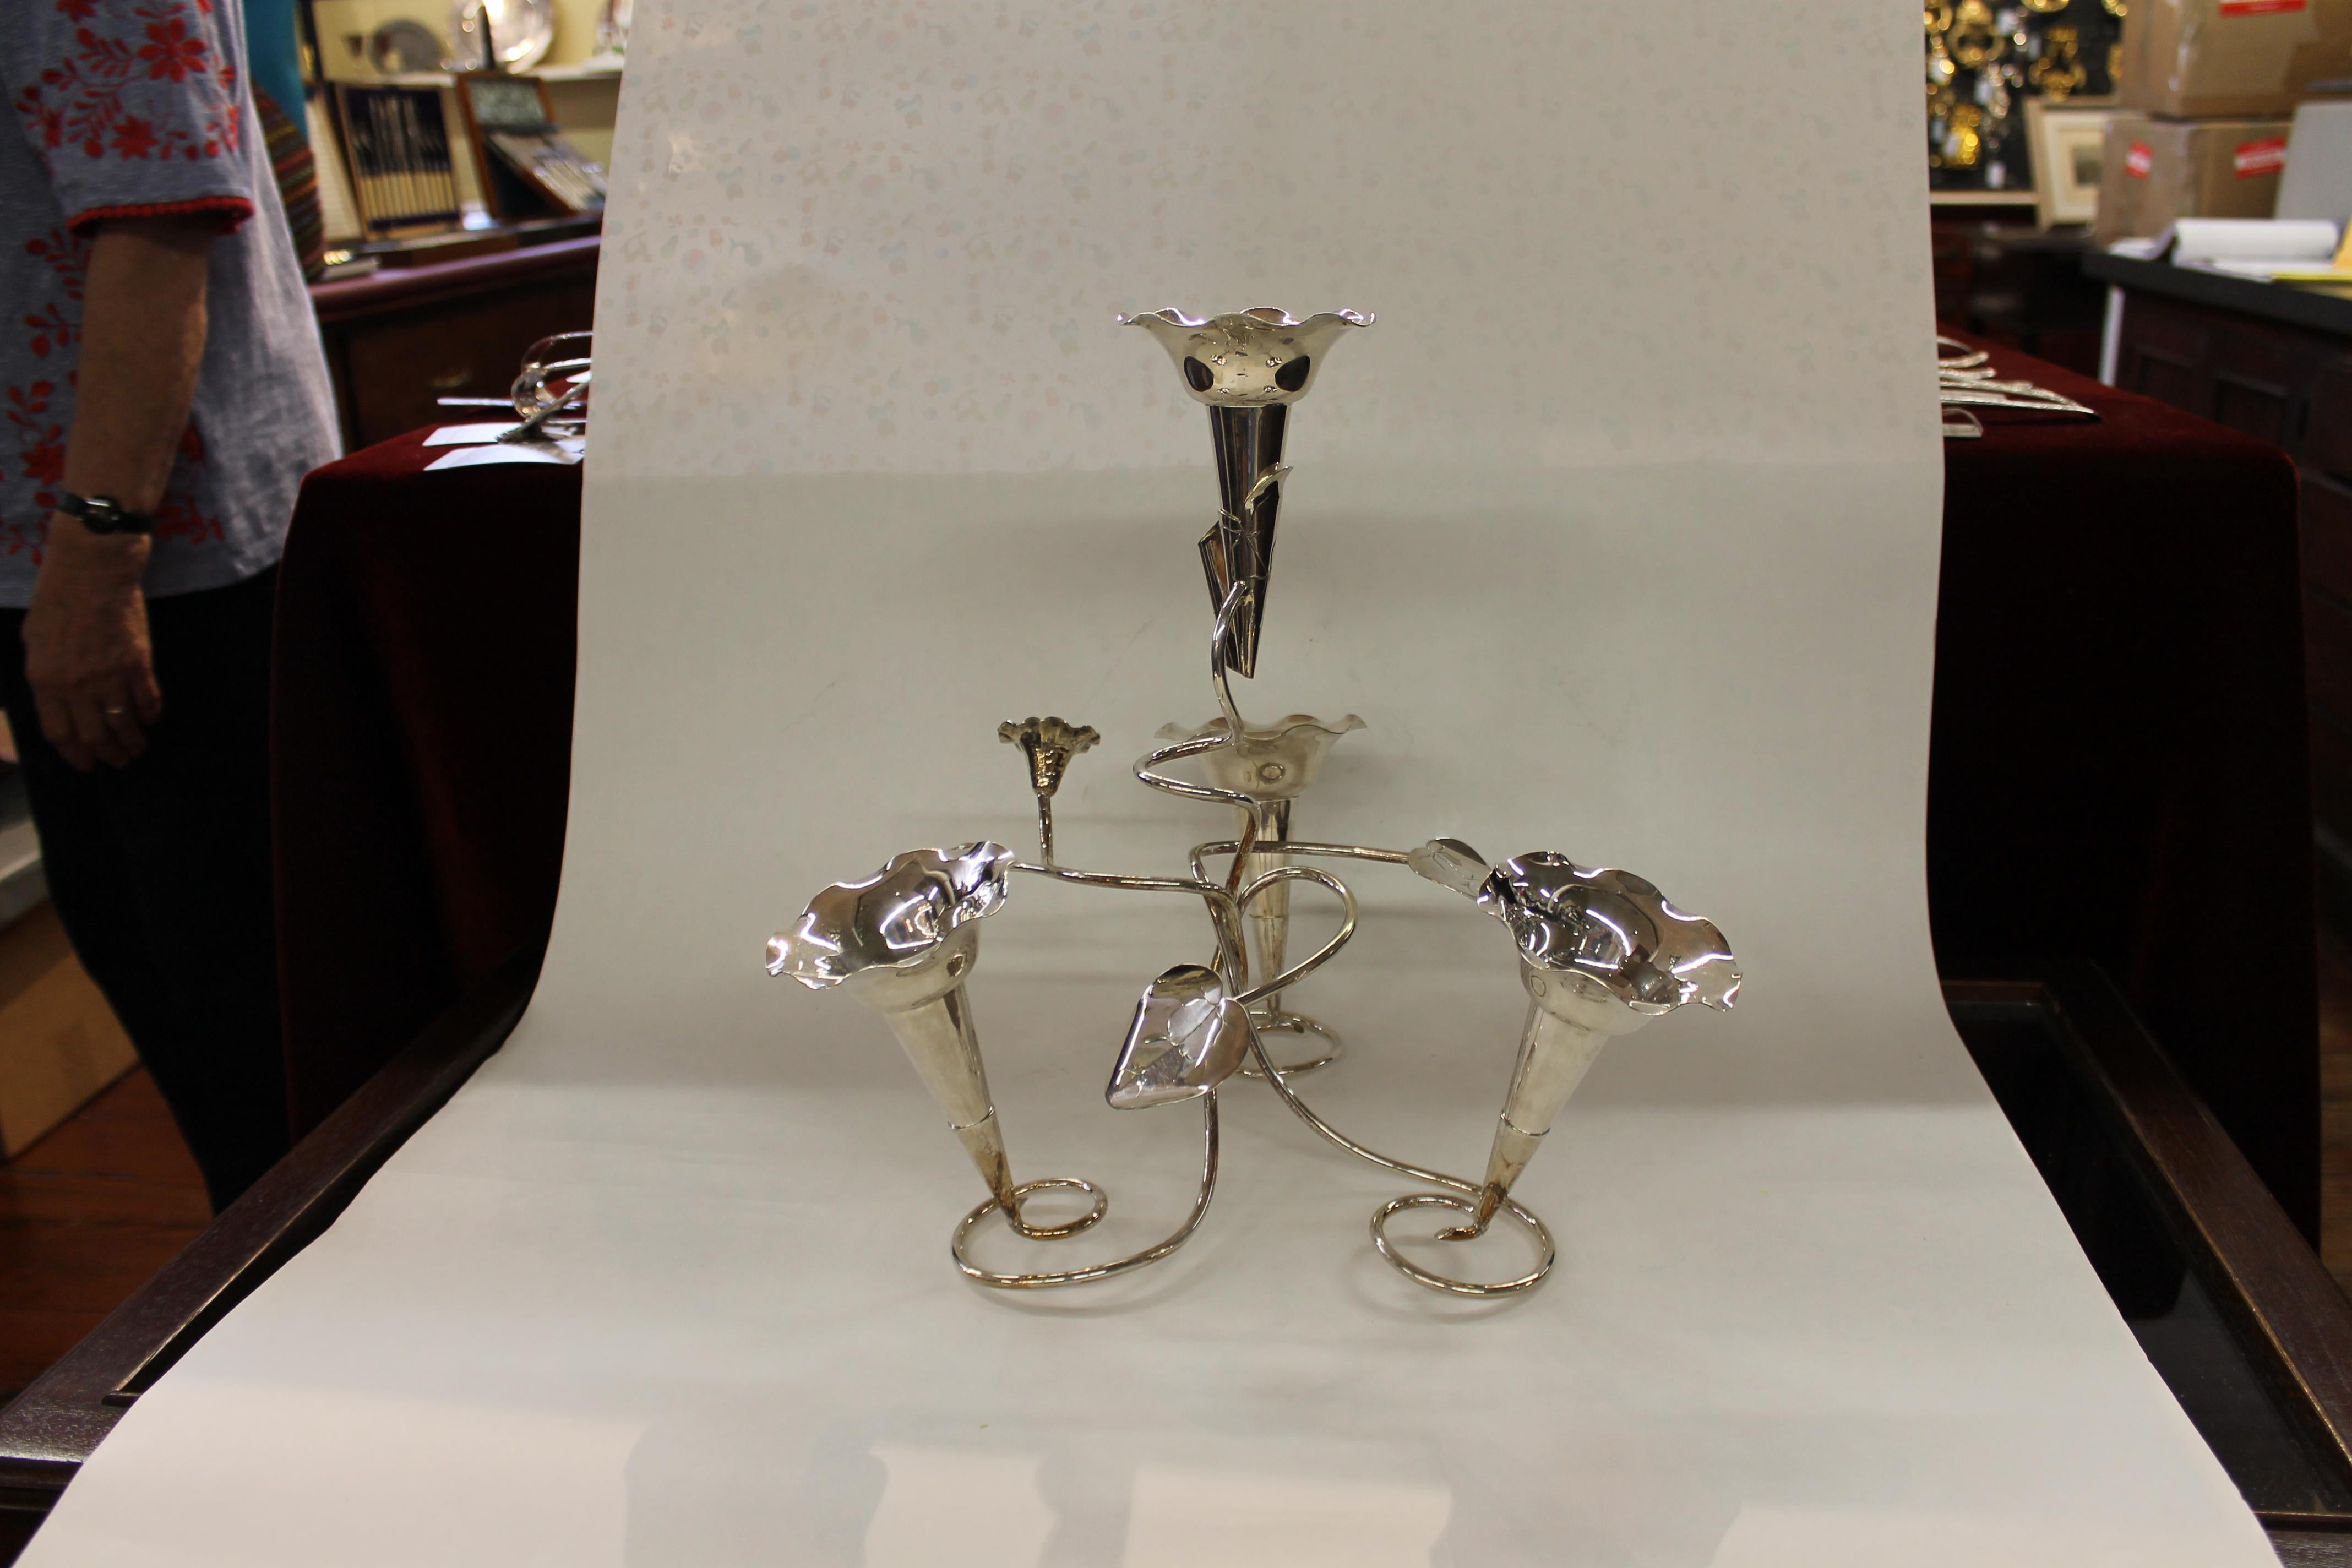 Fine and rare antique English silver plate ivy motif four-tube floral epergne. Please note unusual ivy and leaf